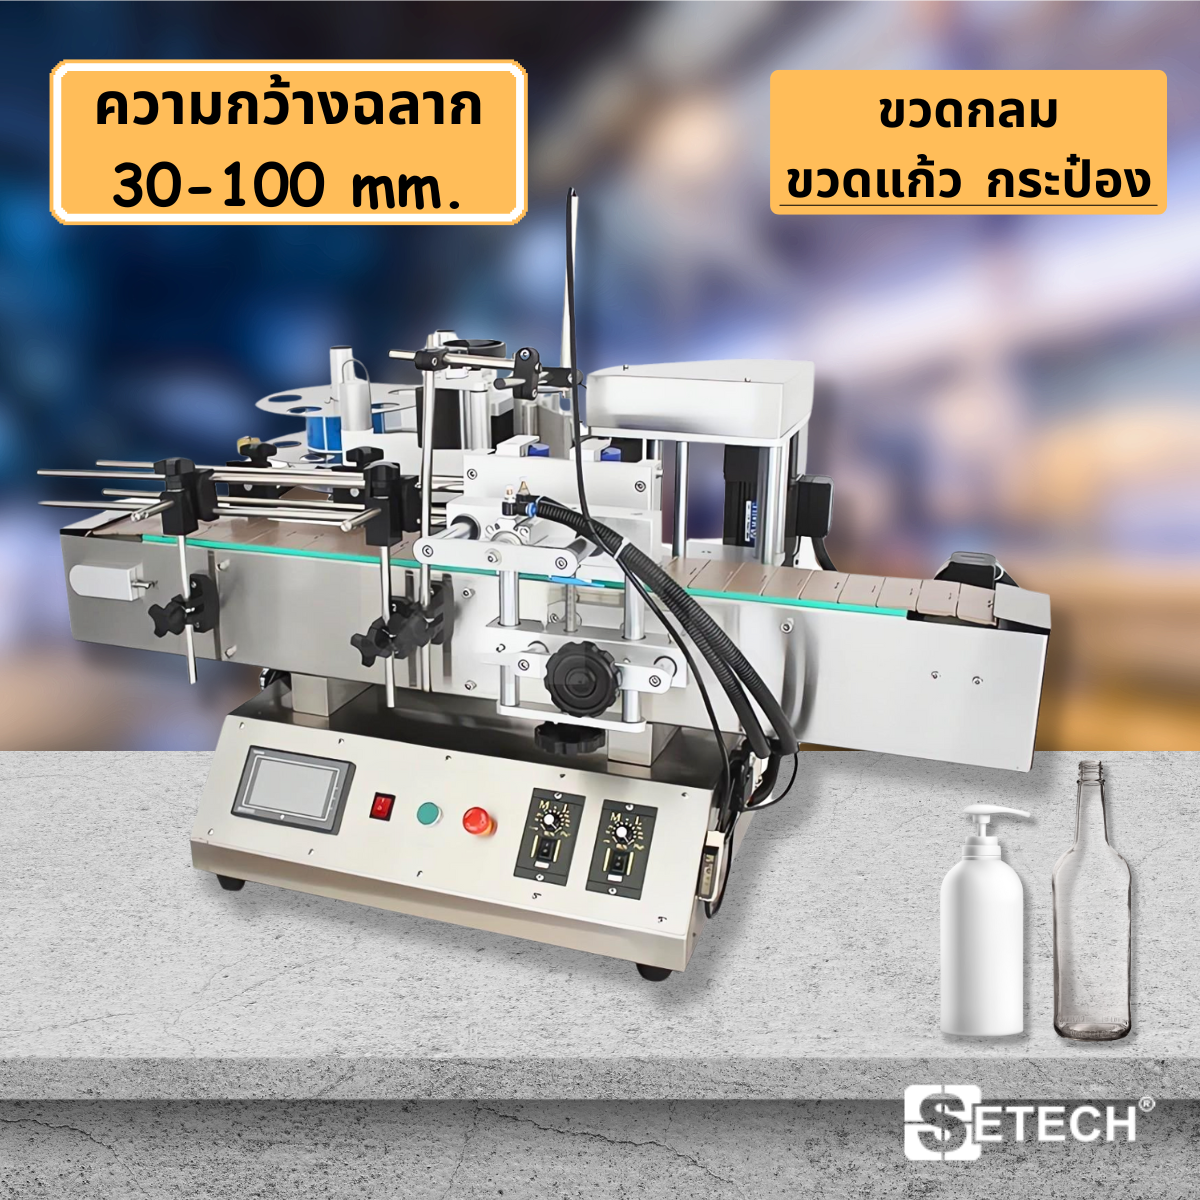 Automatic labeling machine desktop type belt system for round containers label width 30-100 mm LB-05